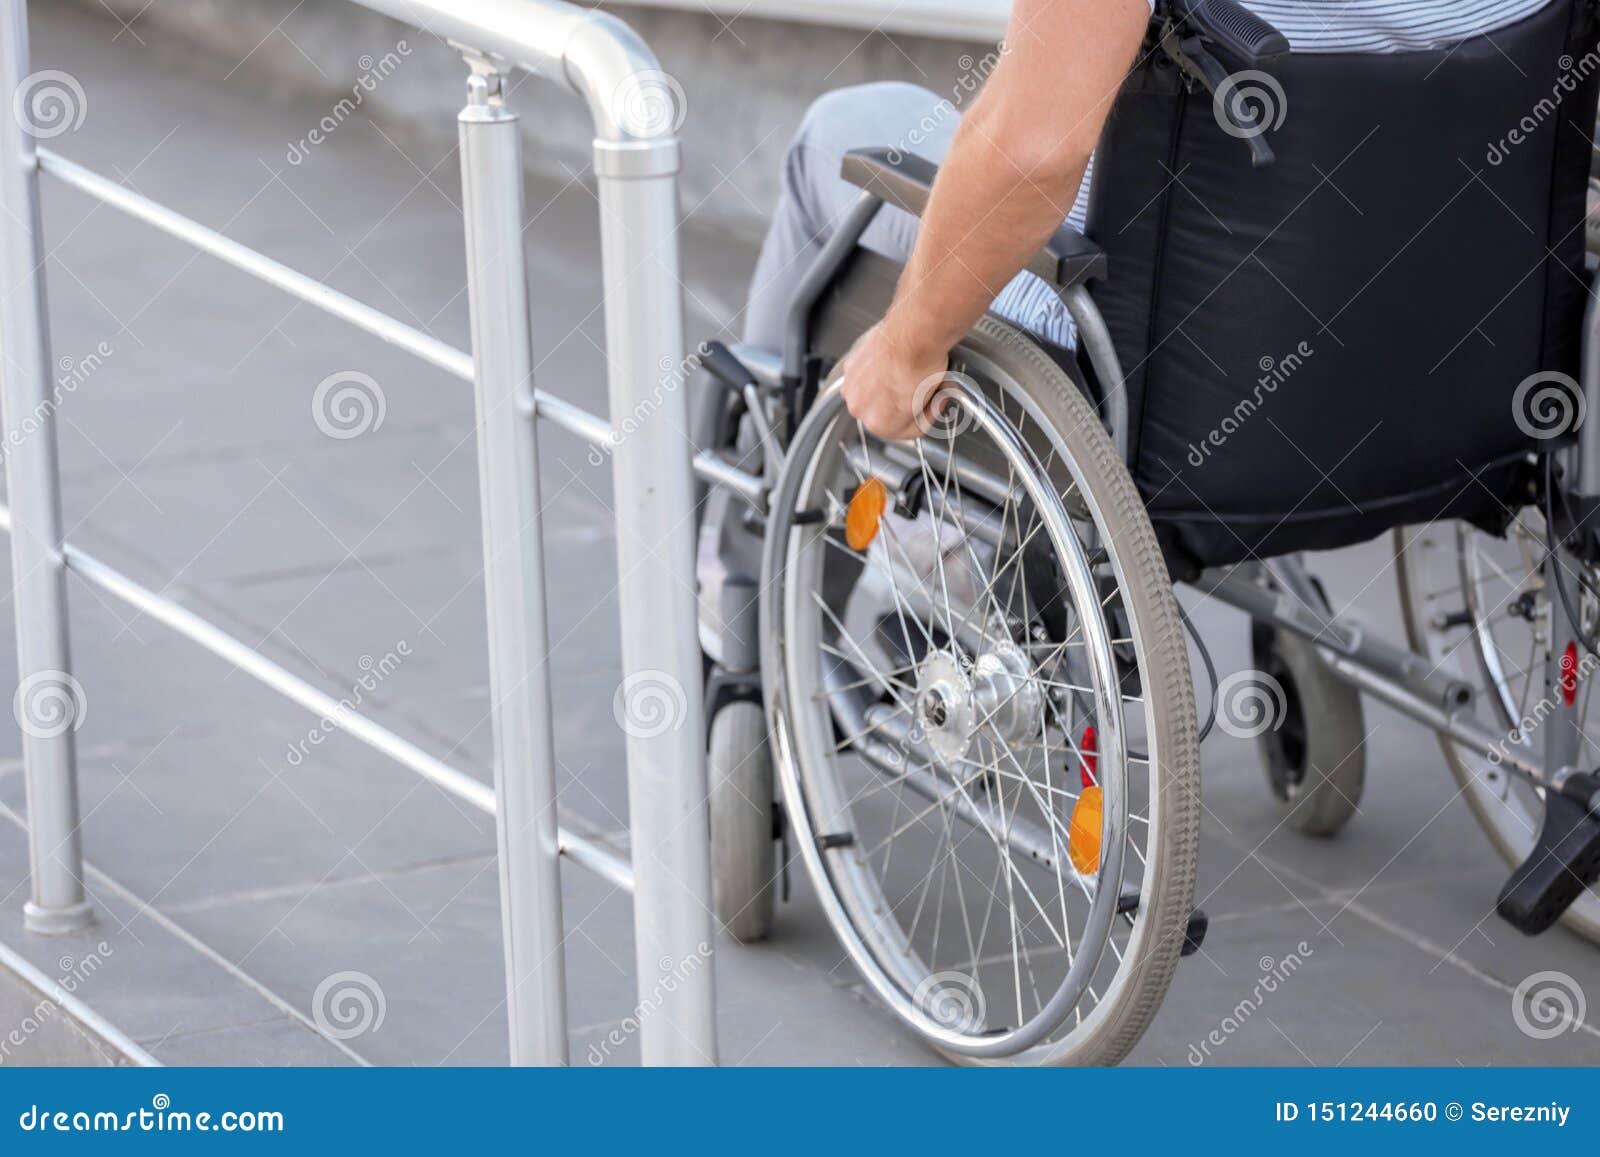 young man in wheelchair on ramp outdoors